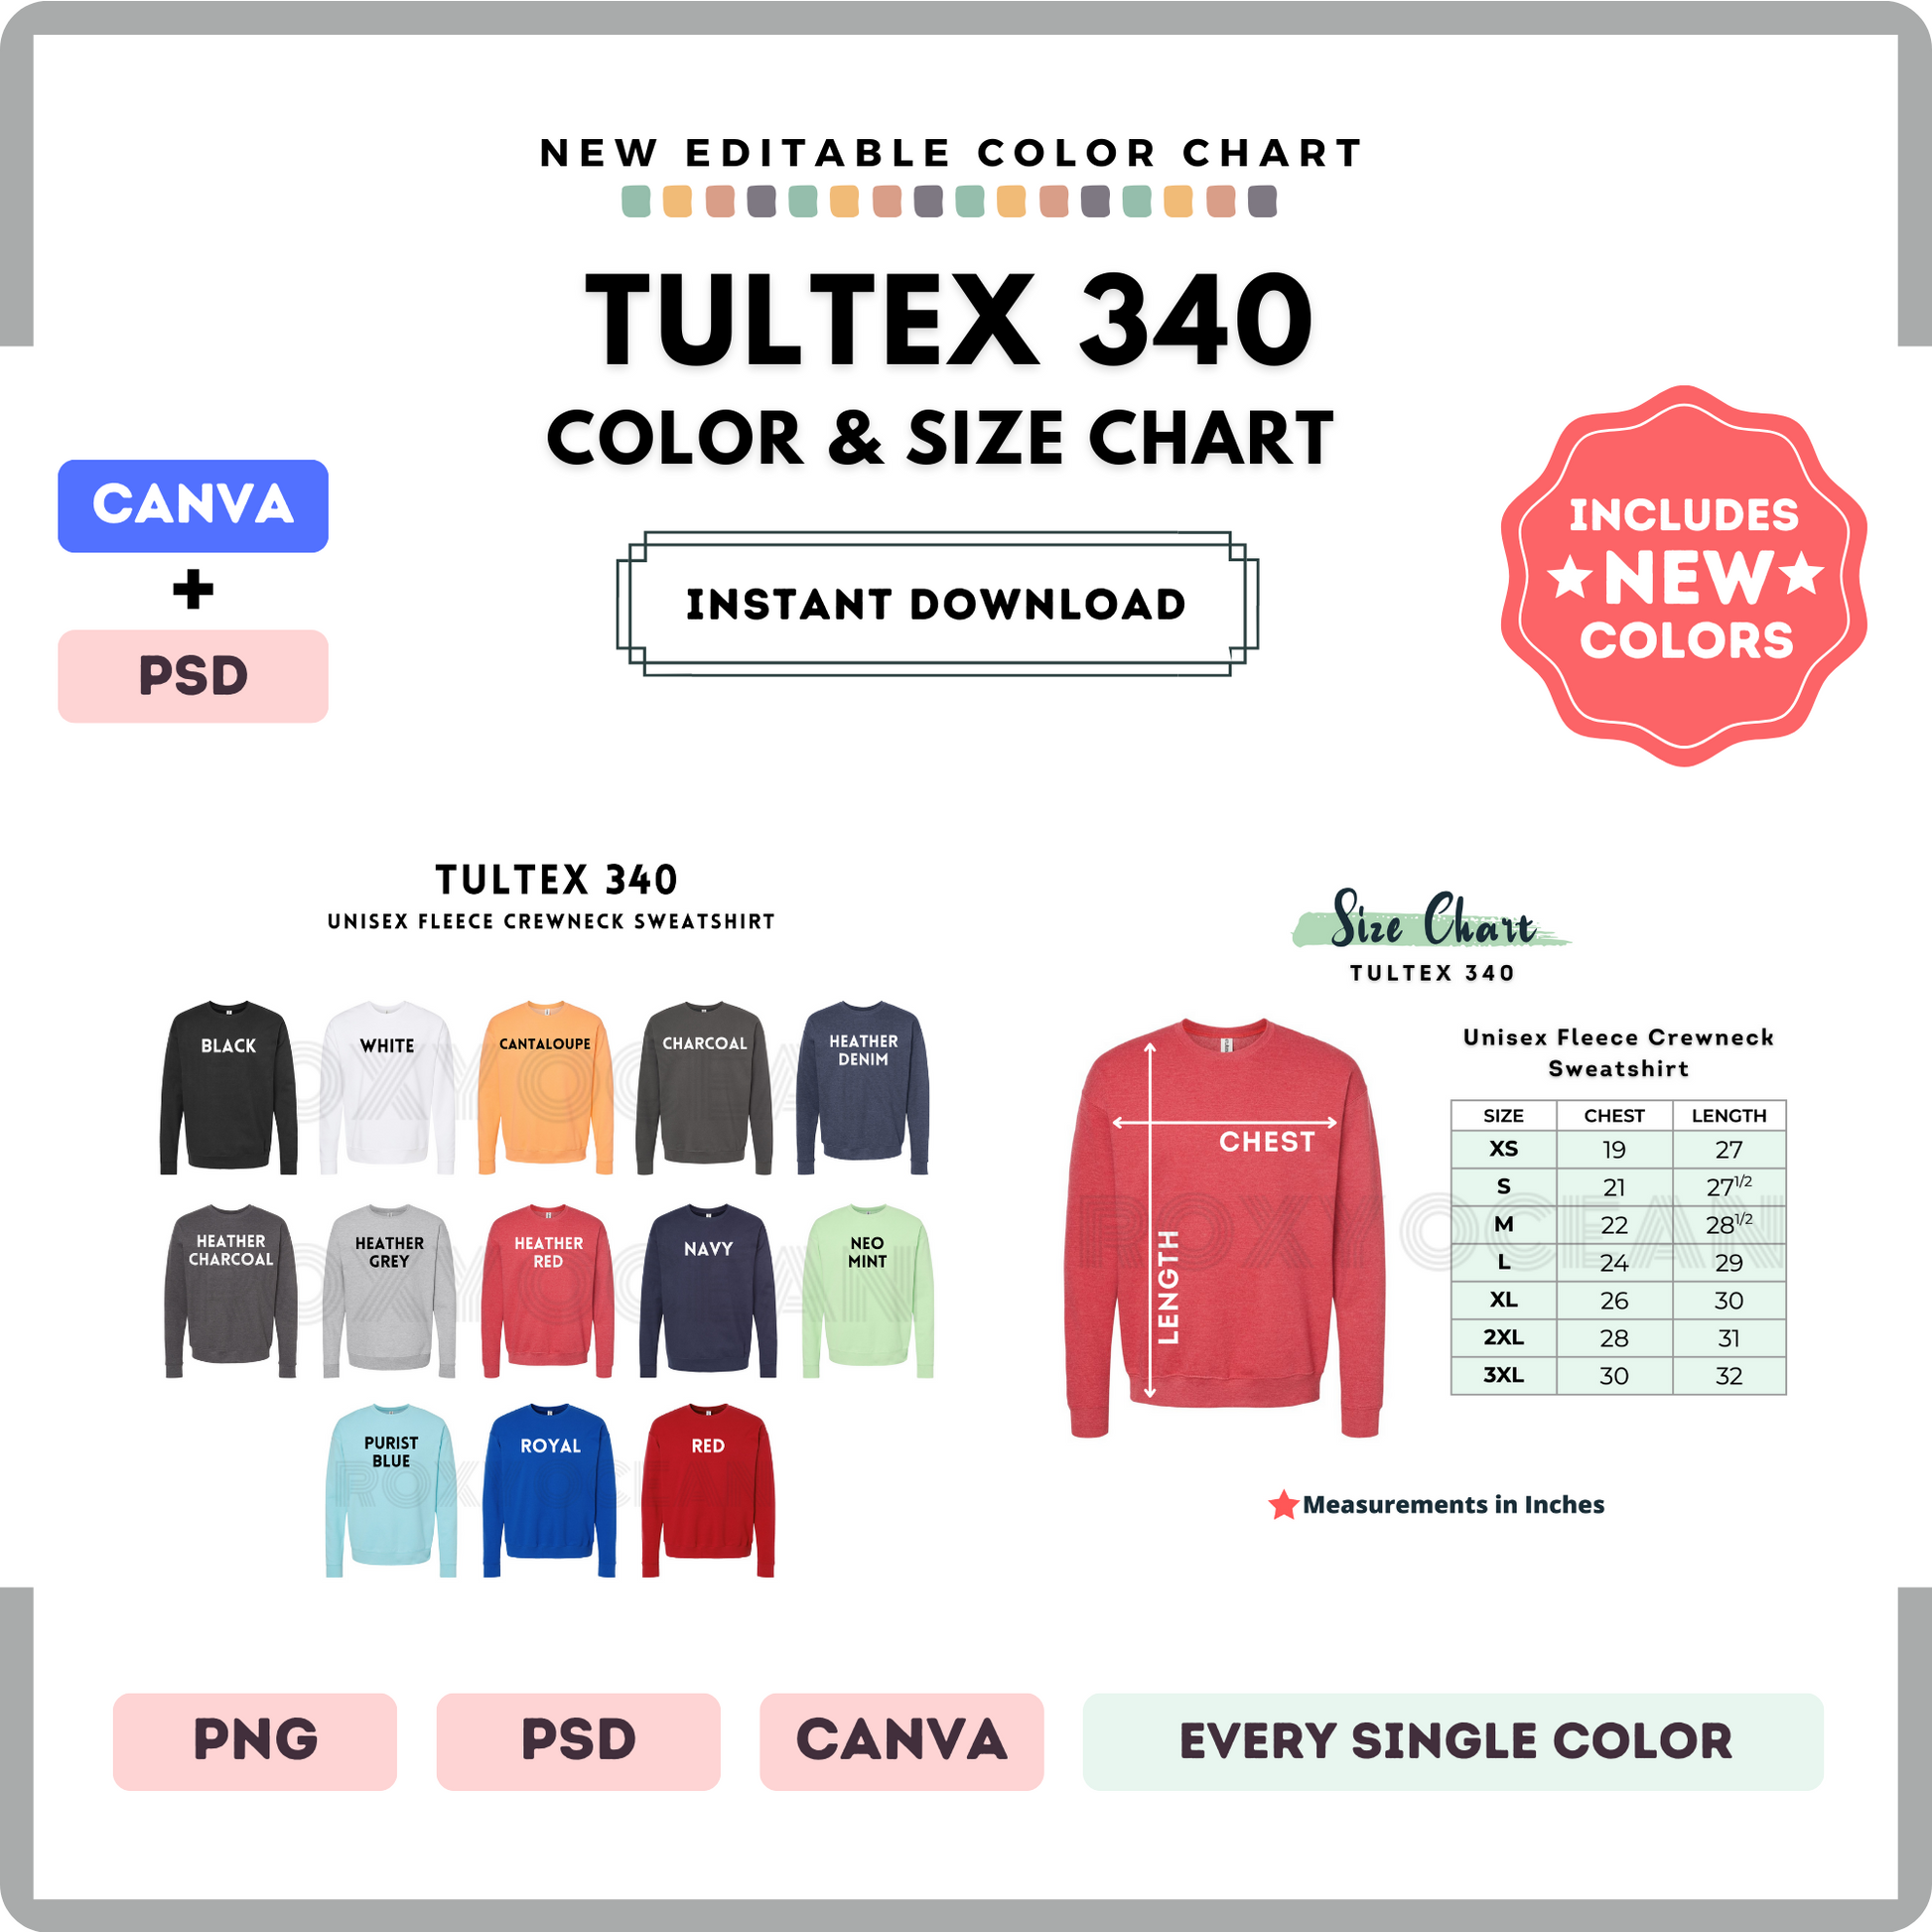 Tultex 340 Color and Size Chart